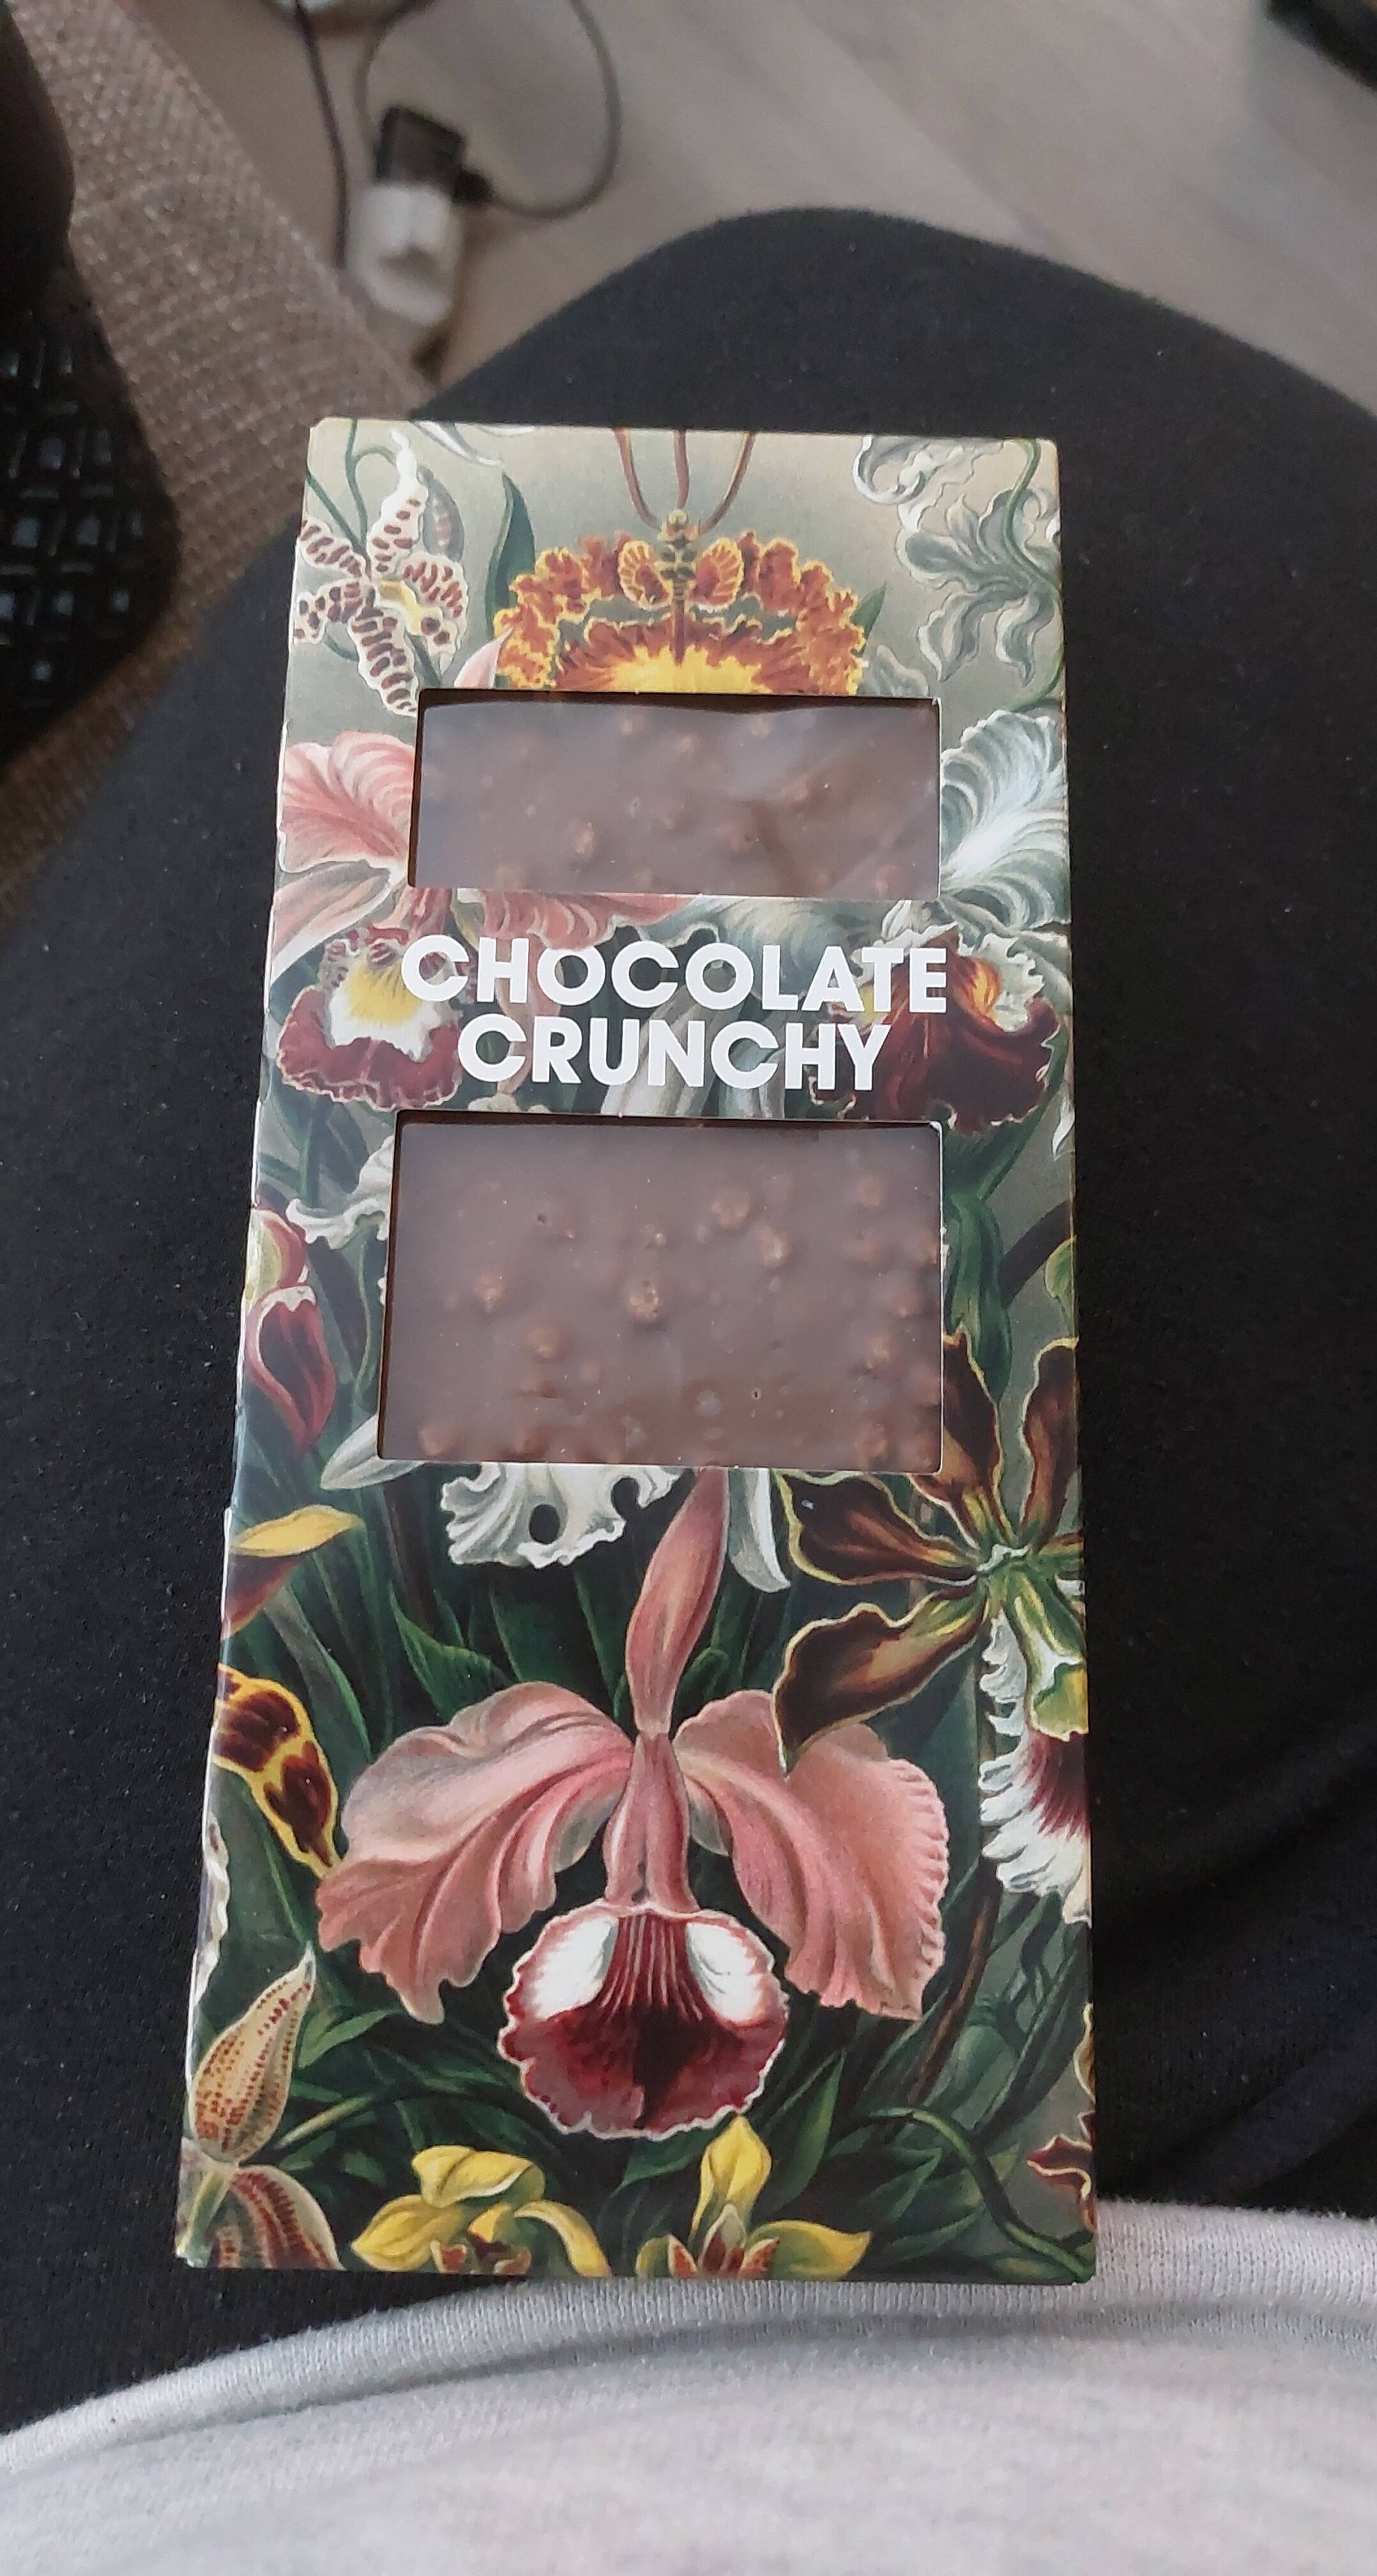 Chocolate crunchy - Product